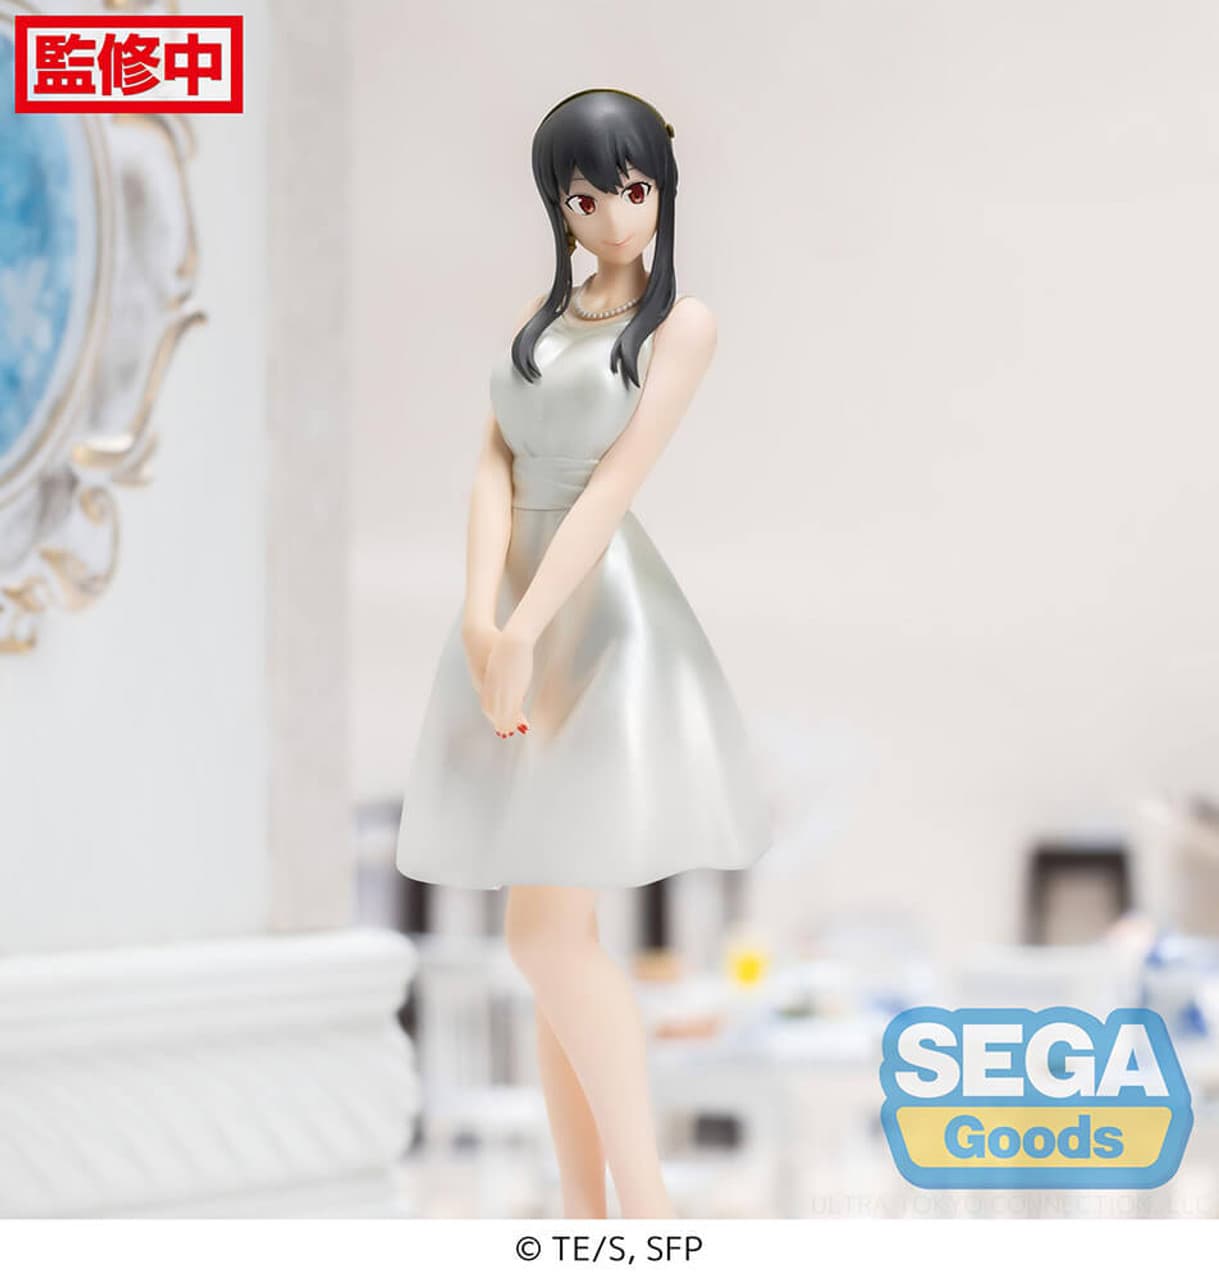 Spy × Family - Yor Forger - PM Figure - Party (SEGA) - CLEV Collectibles